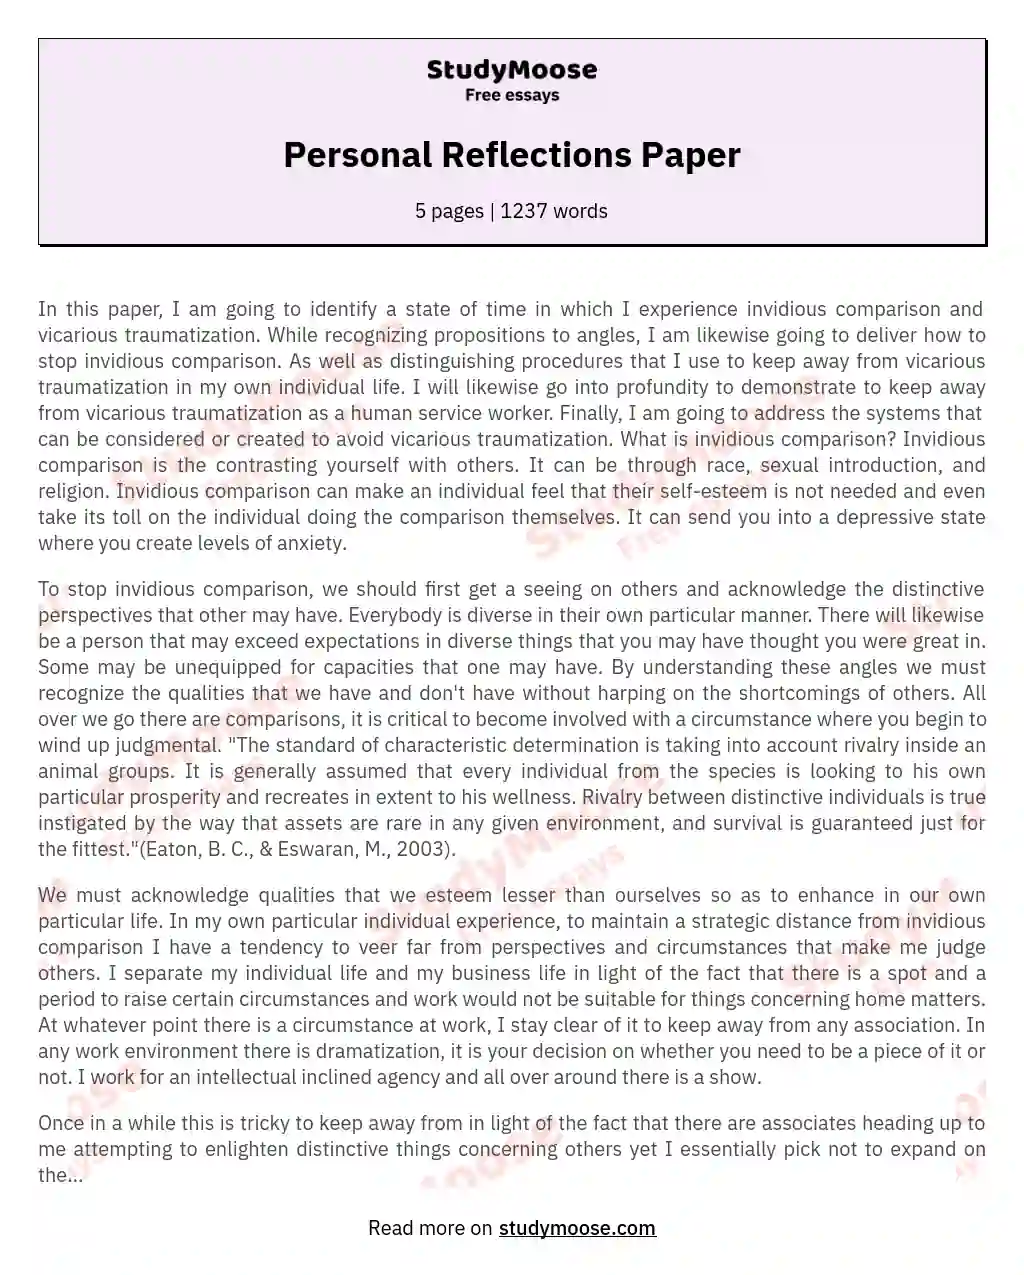 Personal Reflections Paper